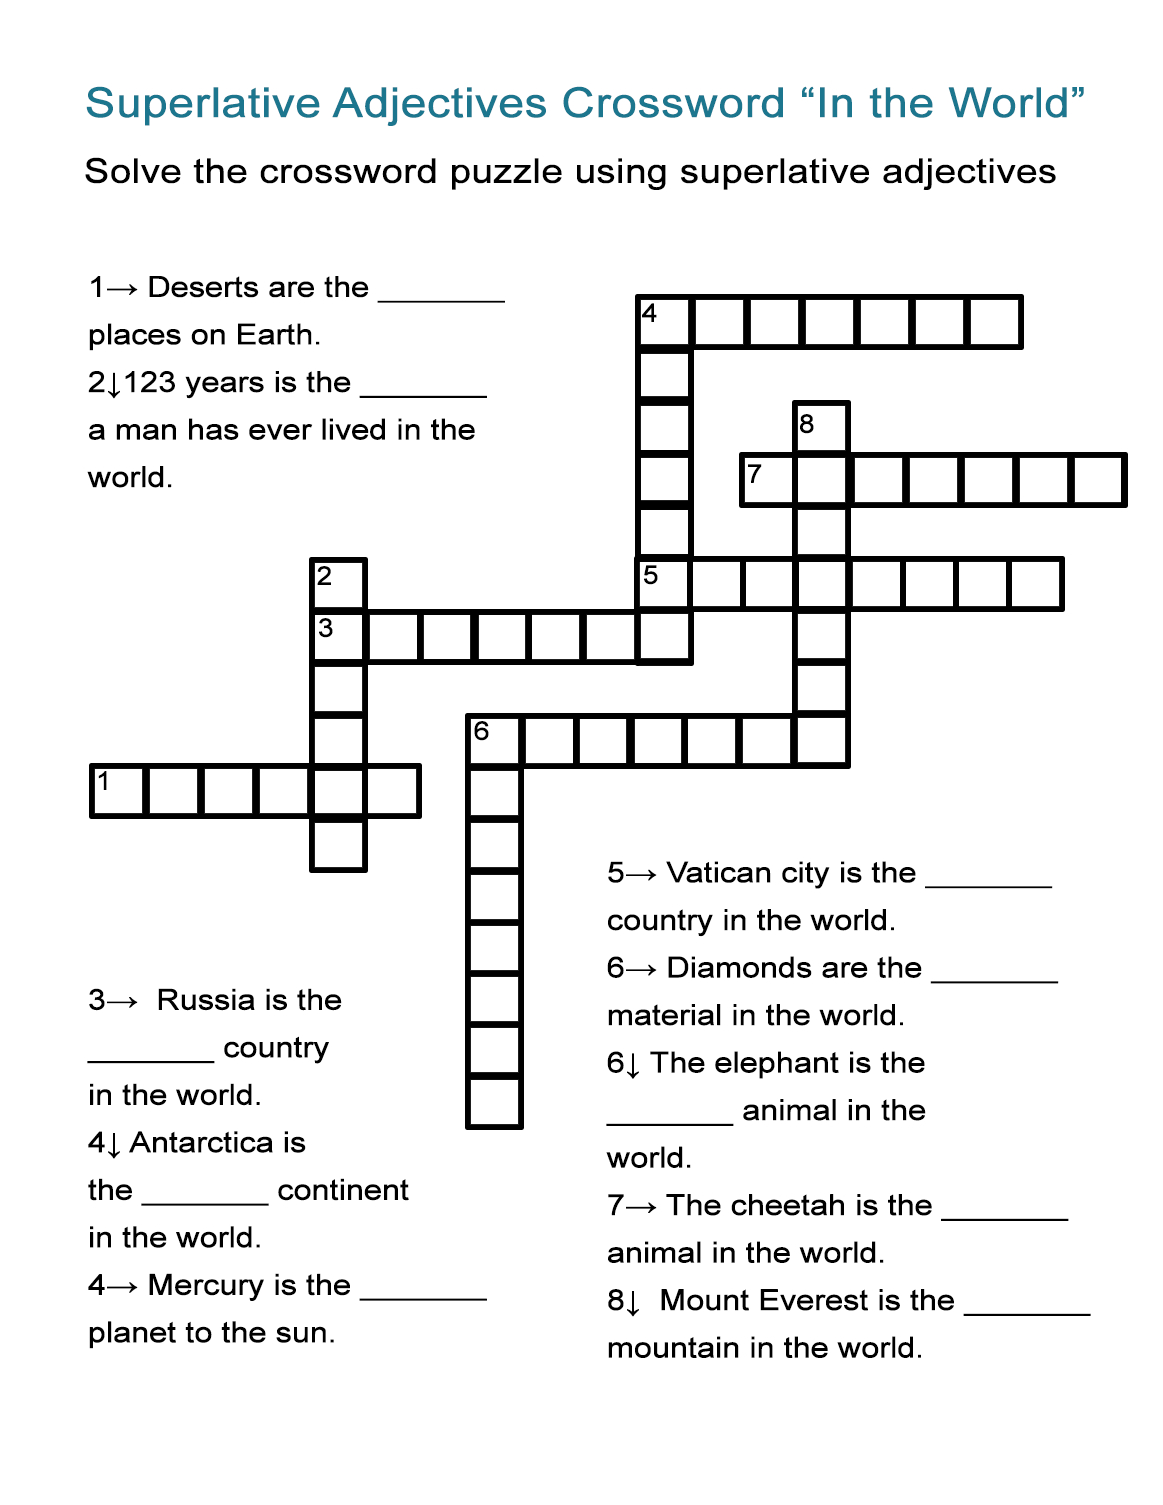 Superlative Adjectives Worksheet - &amp;quot;in The World&amp;quot; Crossword Puzzle - Printable English Crossword Puzzles With Answers Pdf